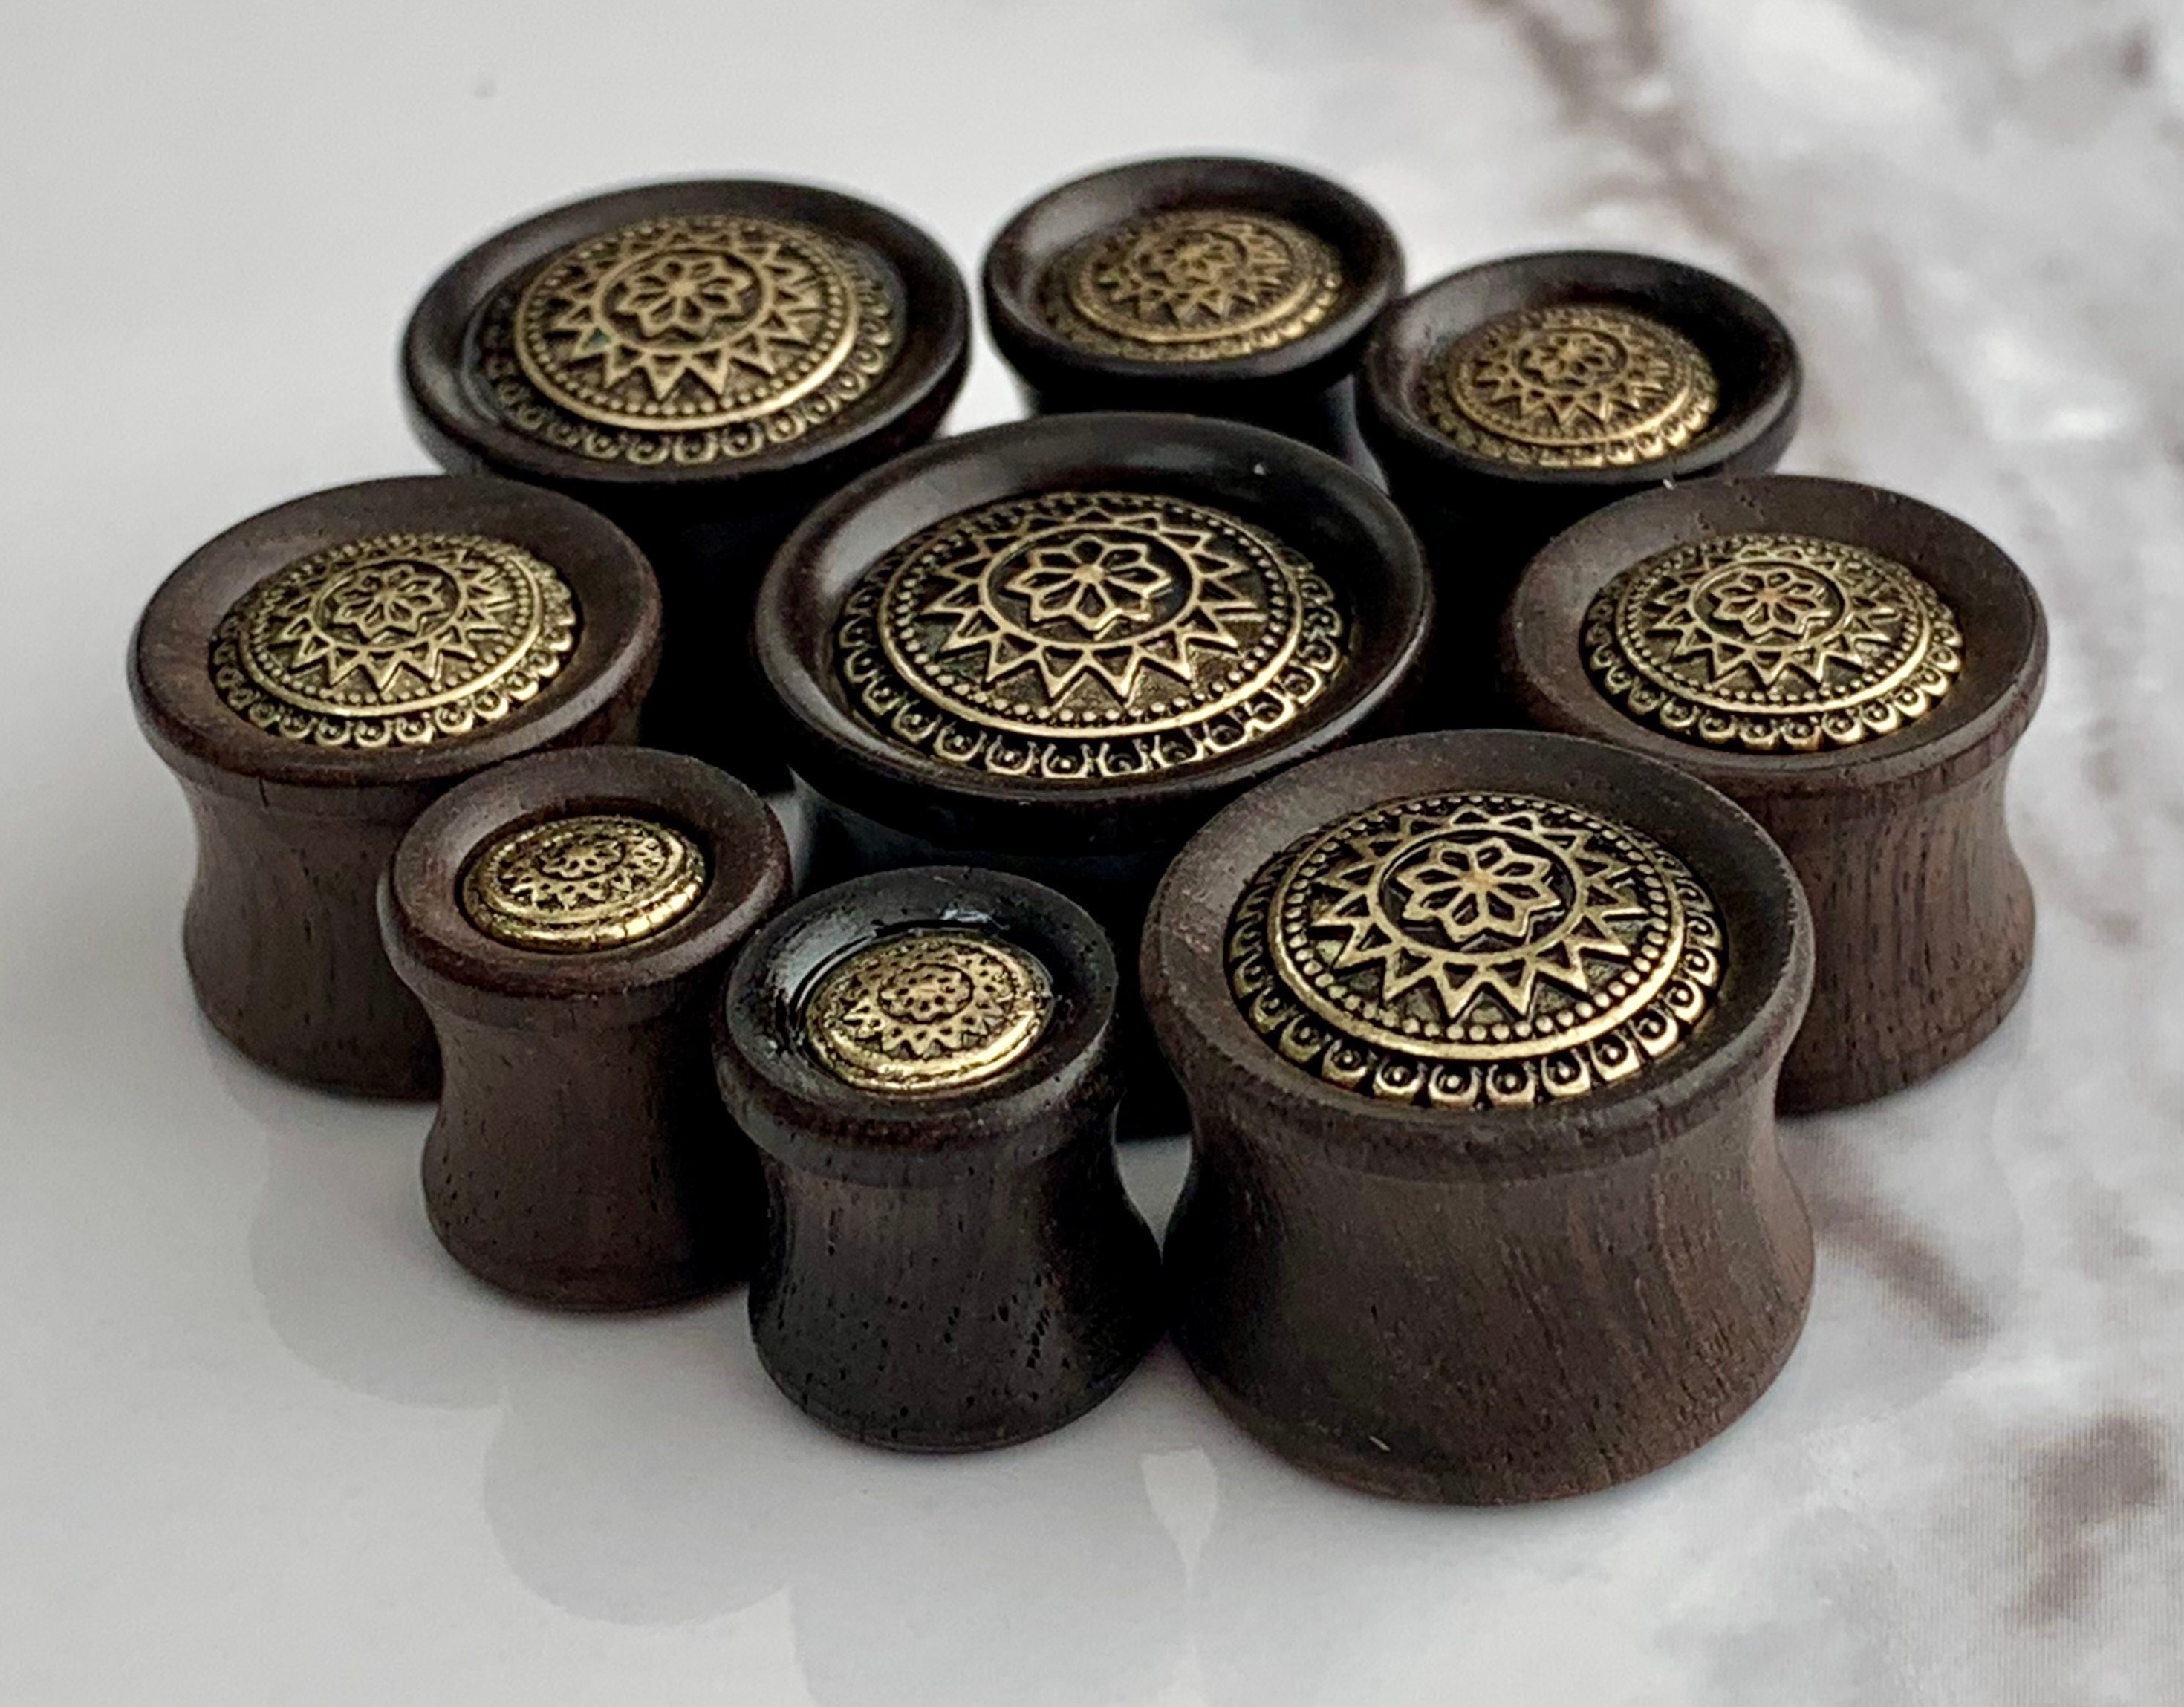 Turquoise Antique Gold Plated Tribal Sun Organic Ebony Wood Double Flared Saddle Plugs 25mm 8mm Sold as a Pair to 1 Available in Sizes from 0G 